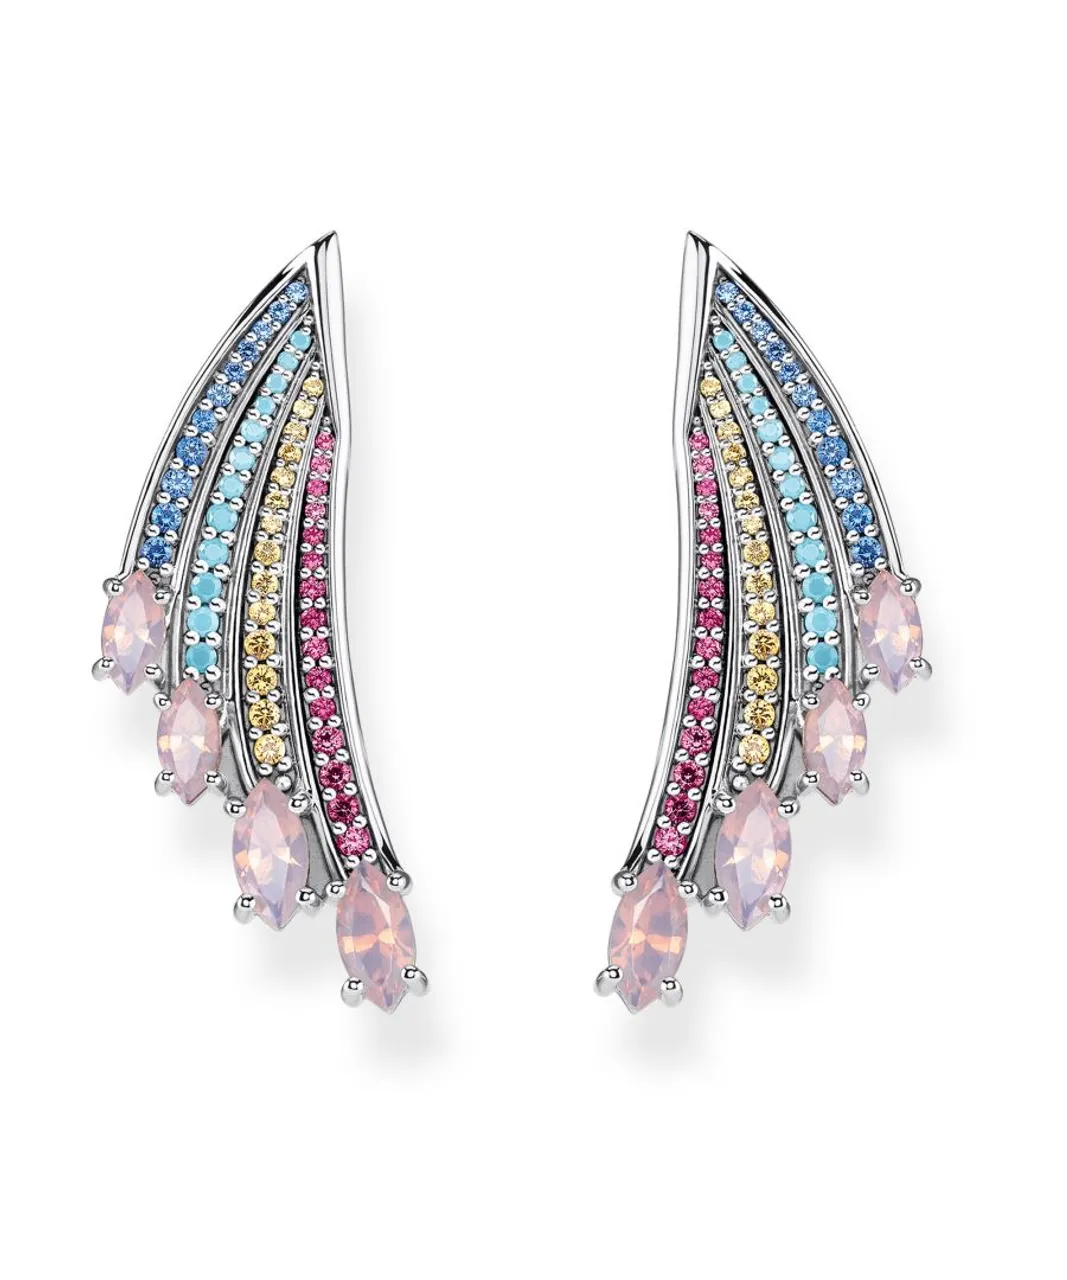 Thomas Sabo Womens Women´s Earrings Bright Silver-Coloured Hummingbird Wing - One Size